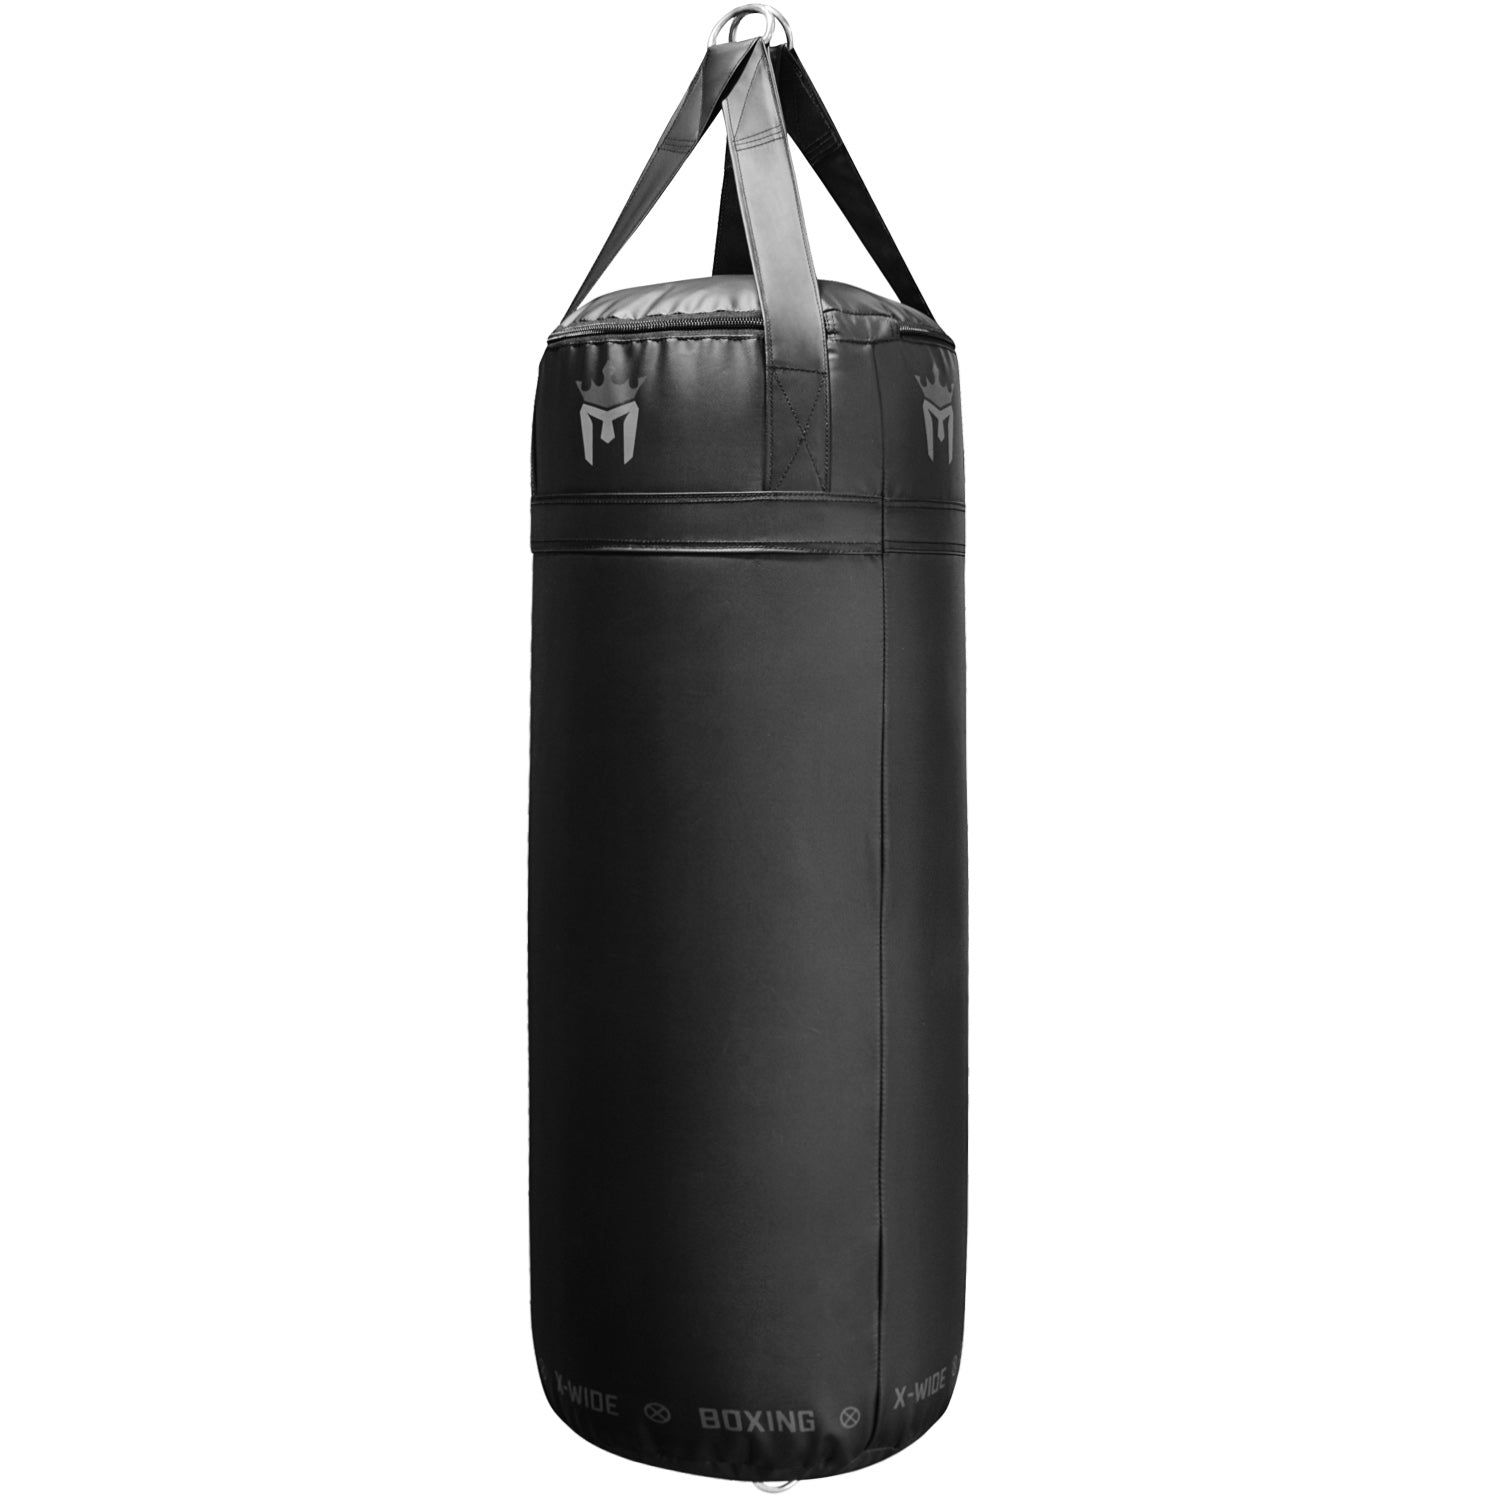 Meister 90lb Filled X-Wide Boxing Heavy Bag w/ Double-End [1138HB90XWBK ...